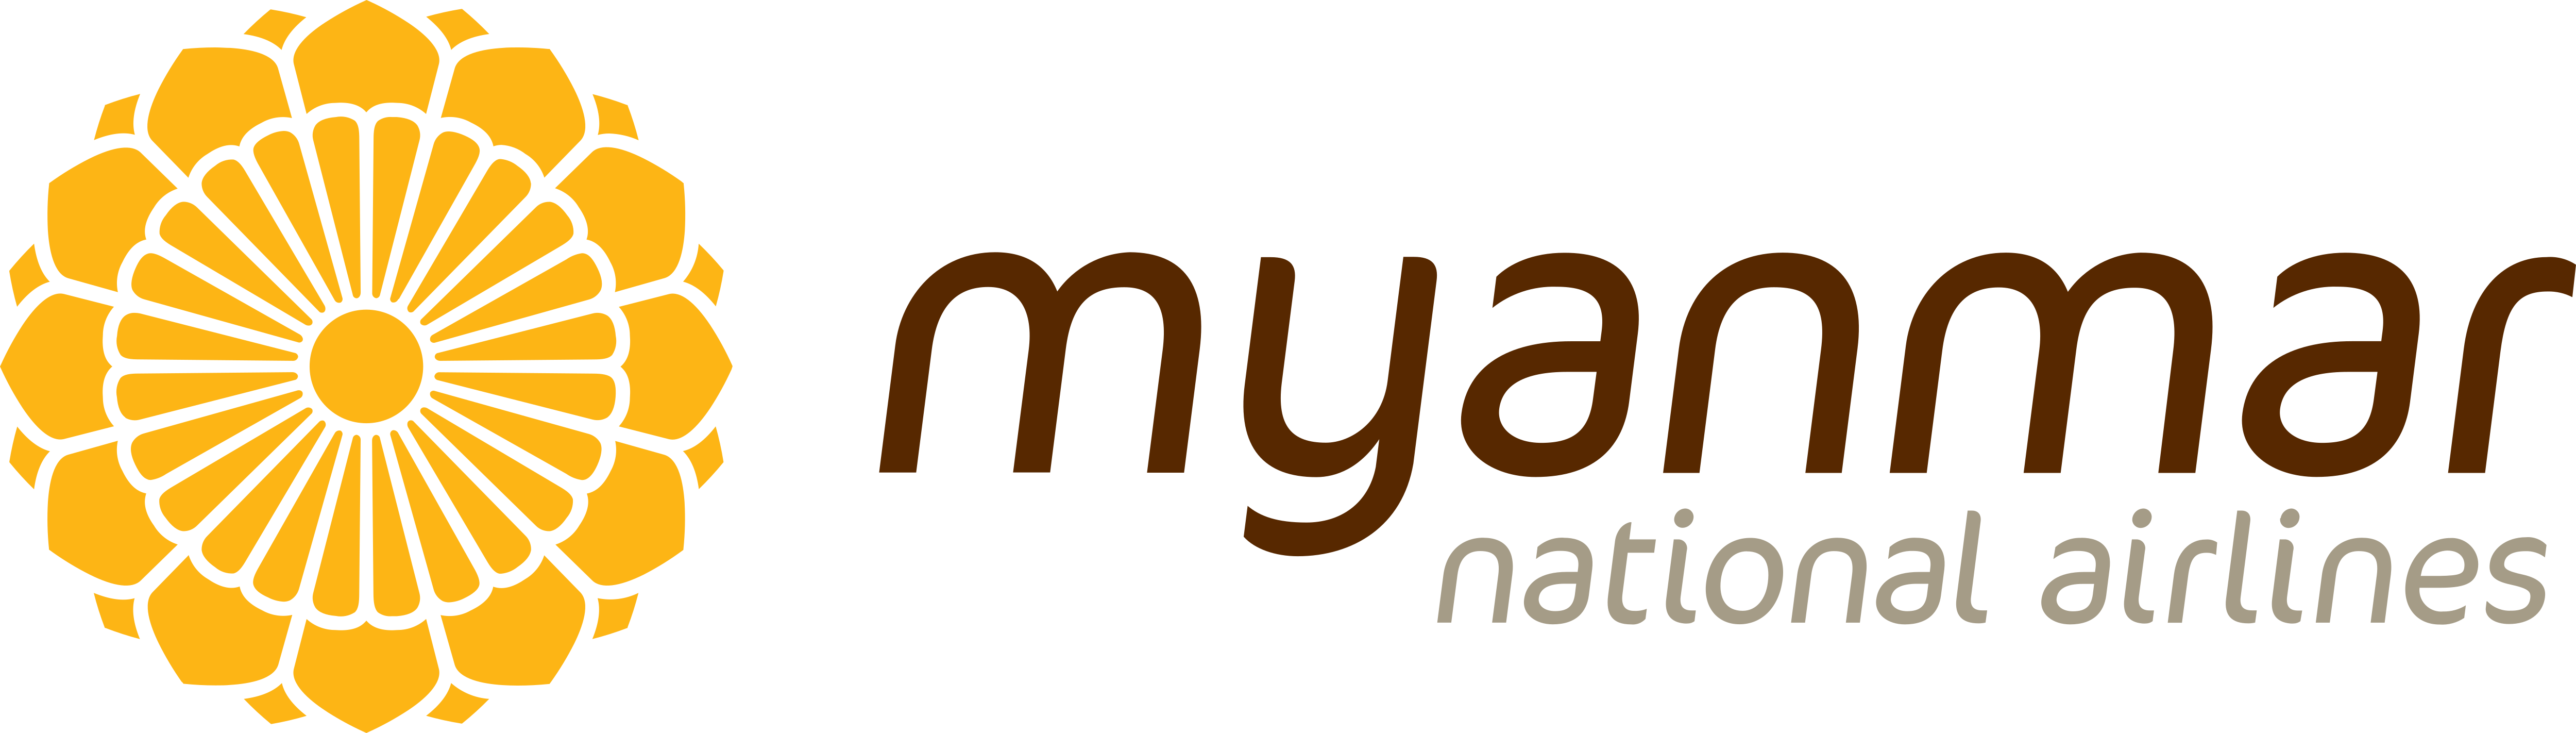 National Airlines Logo - Myanmar National Airlines